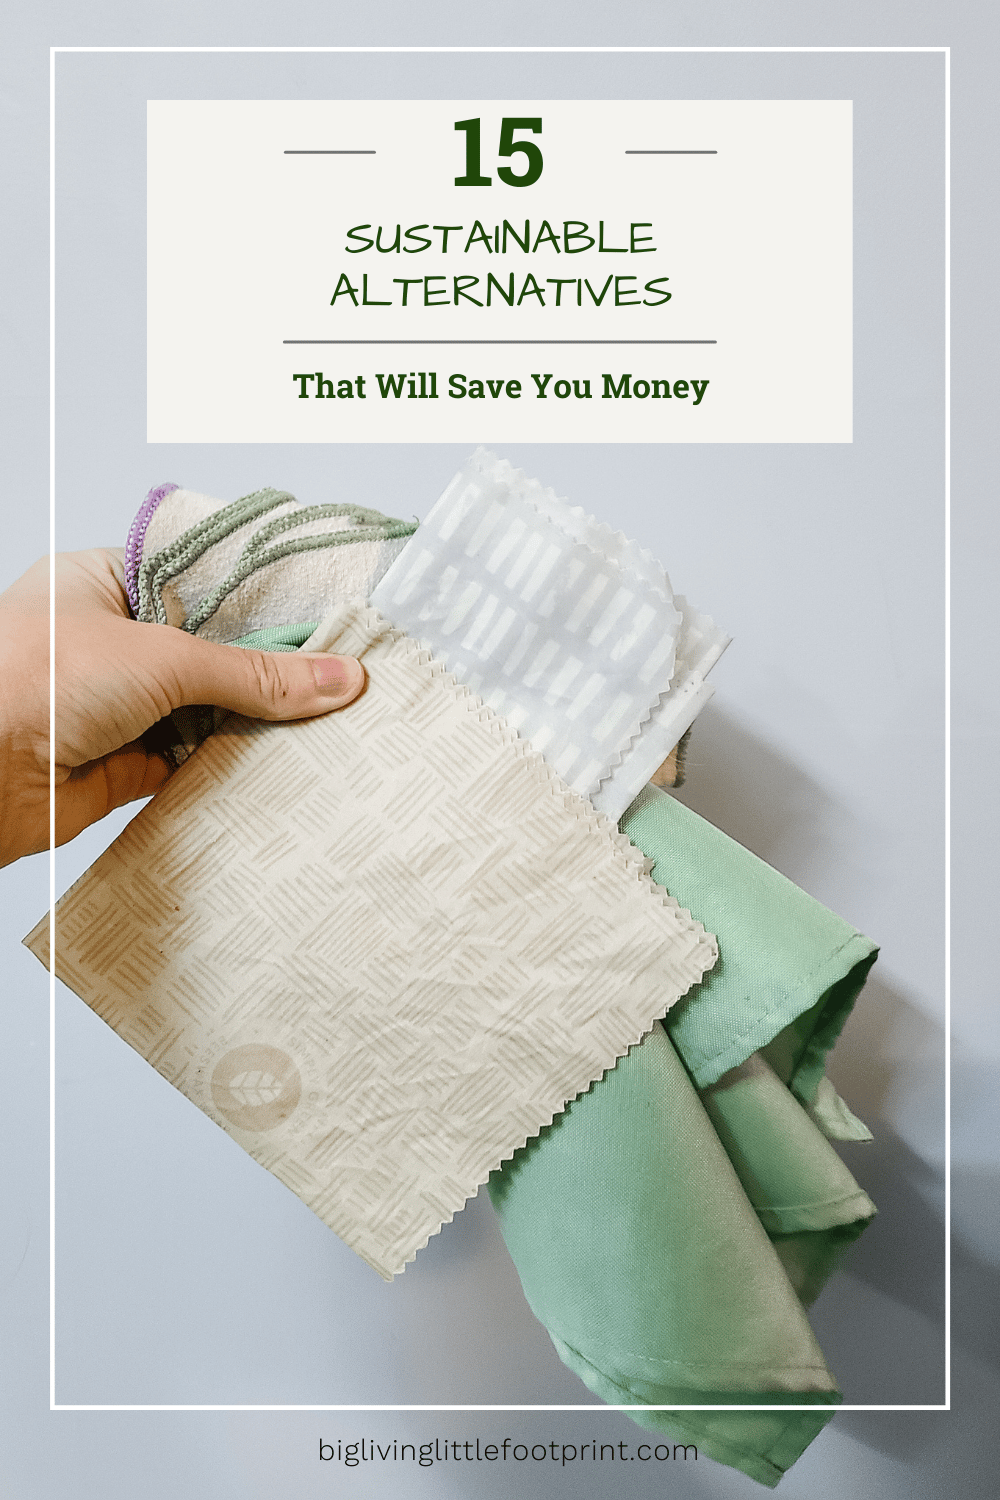 Replace disposable kitchen towels by eco friendly solutions - EasyEcoTips